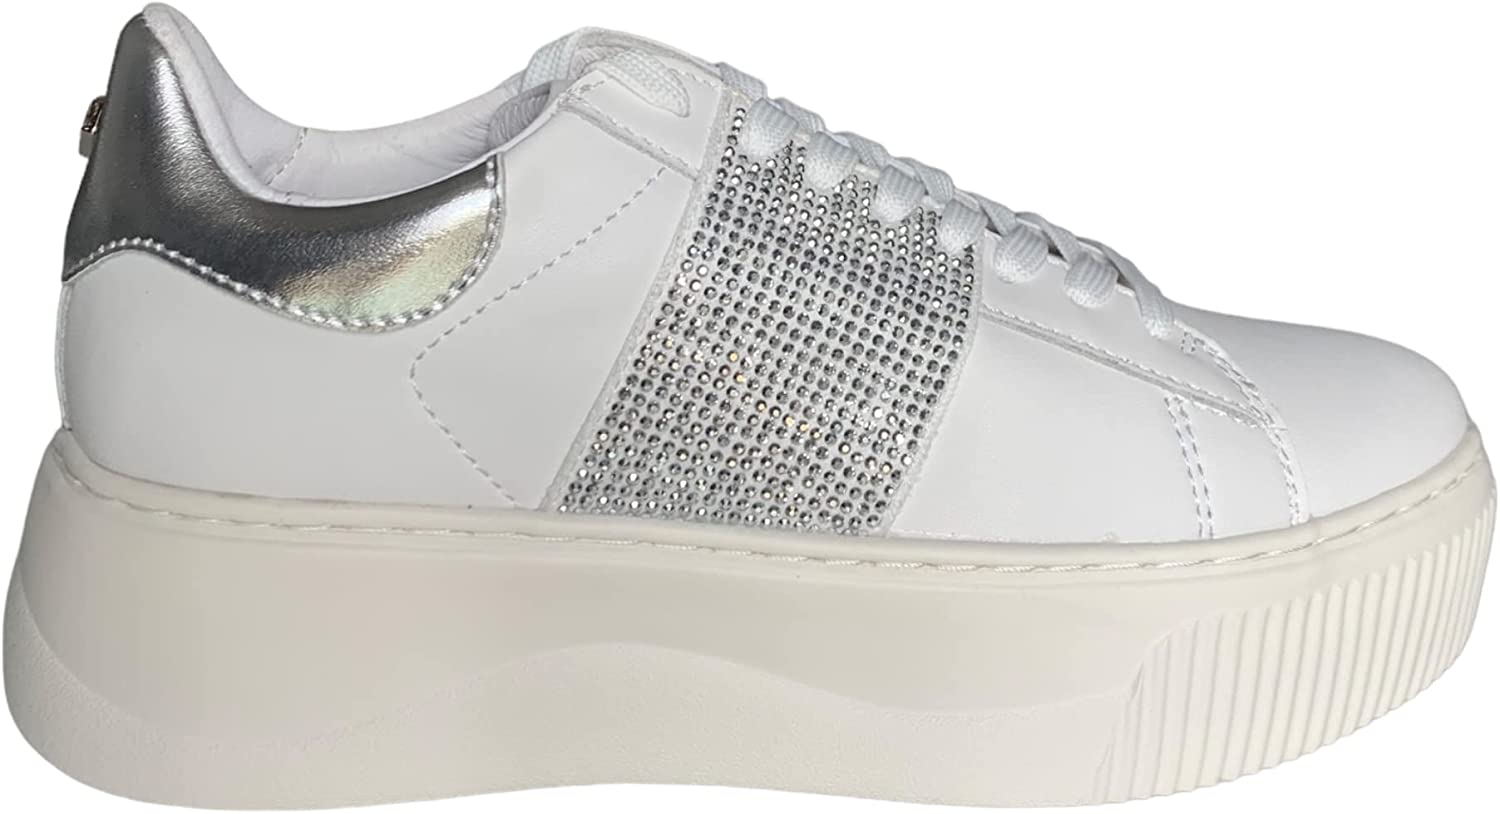 Sneakers Cult Donna Bianco/argento